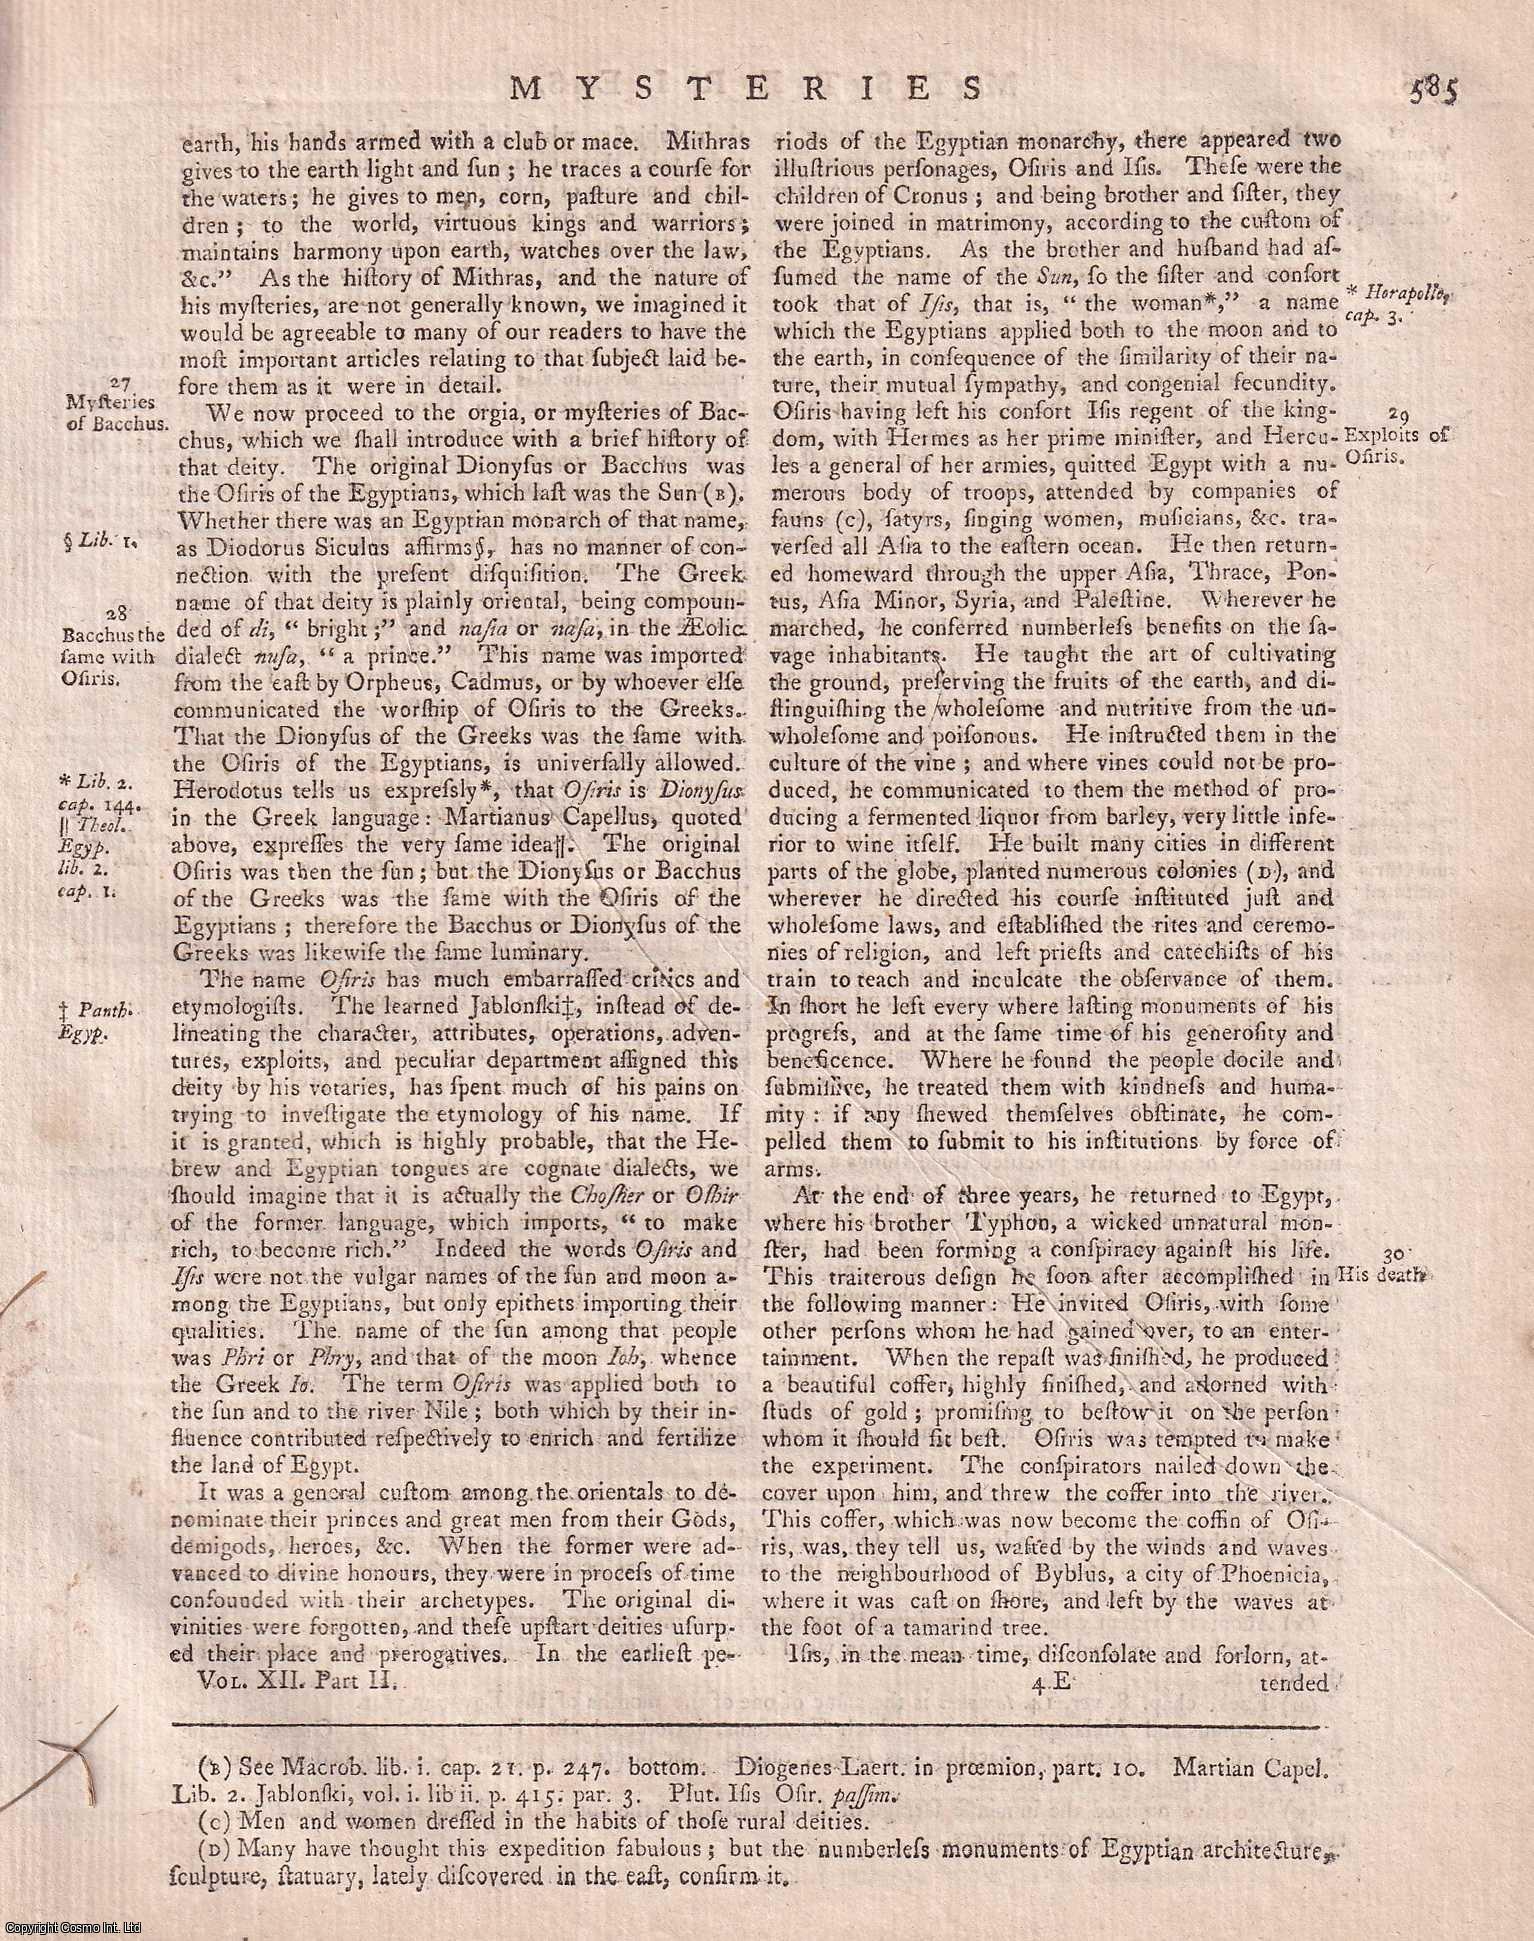 George Gleig (editor) - Mysteries; religious and philosophical. A rare original article from the Encyclopaedia Britannica, Dublin Edition 1797.